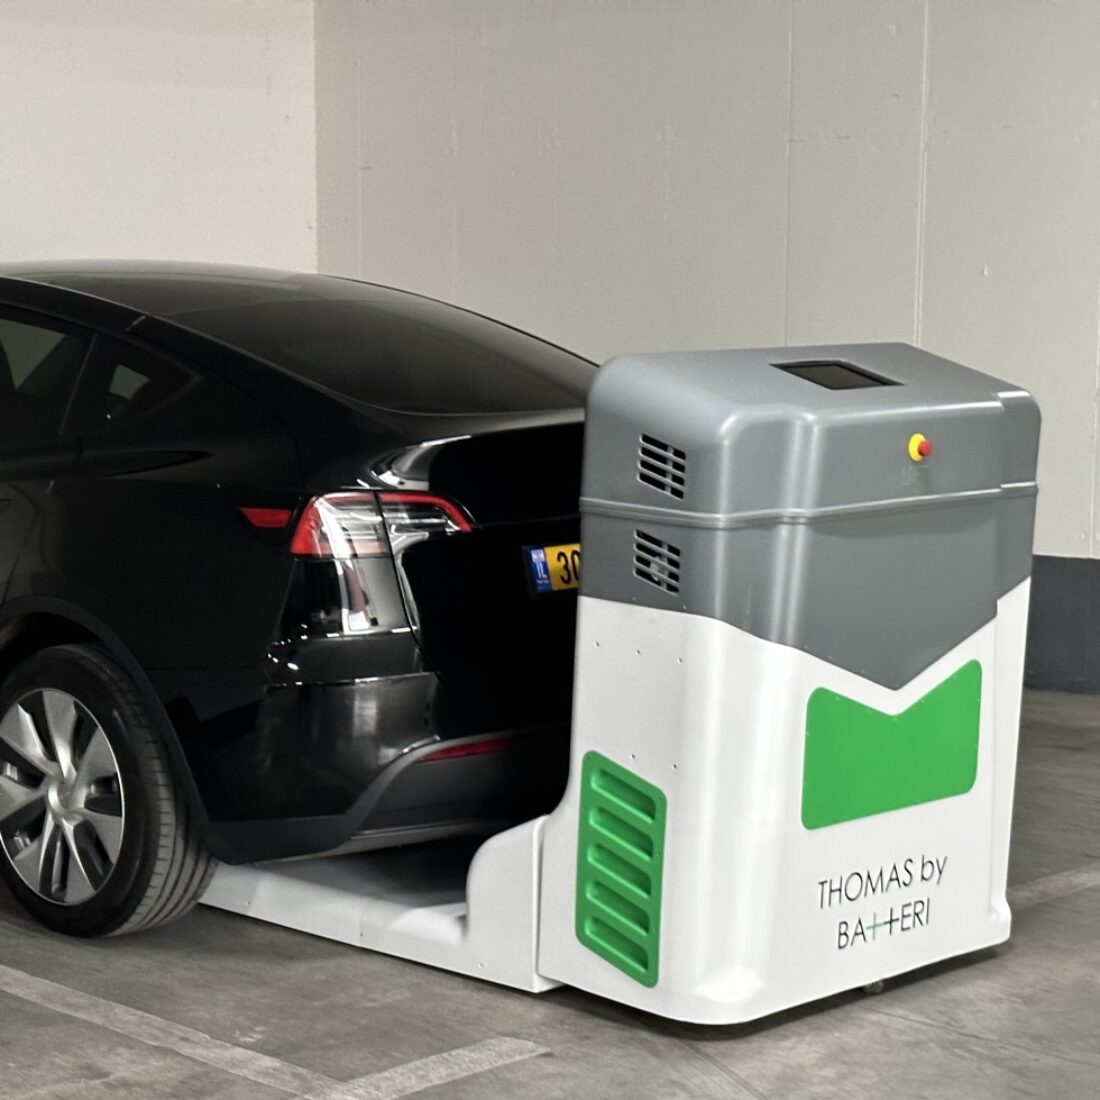 Thomas the EV charger will automatically juice up cars in a parking lot based on owners’ instructions. Photo courtesy of BaTTeRi